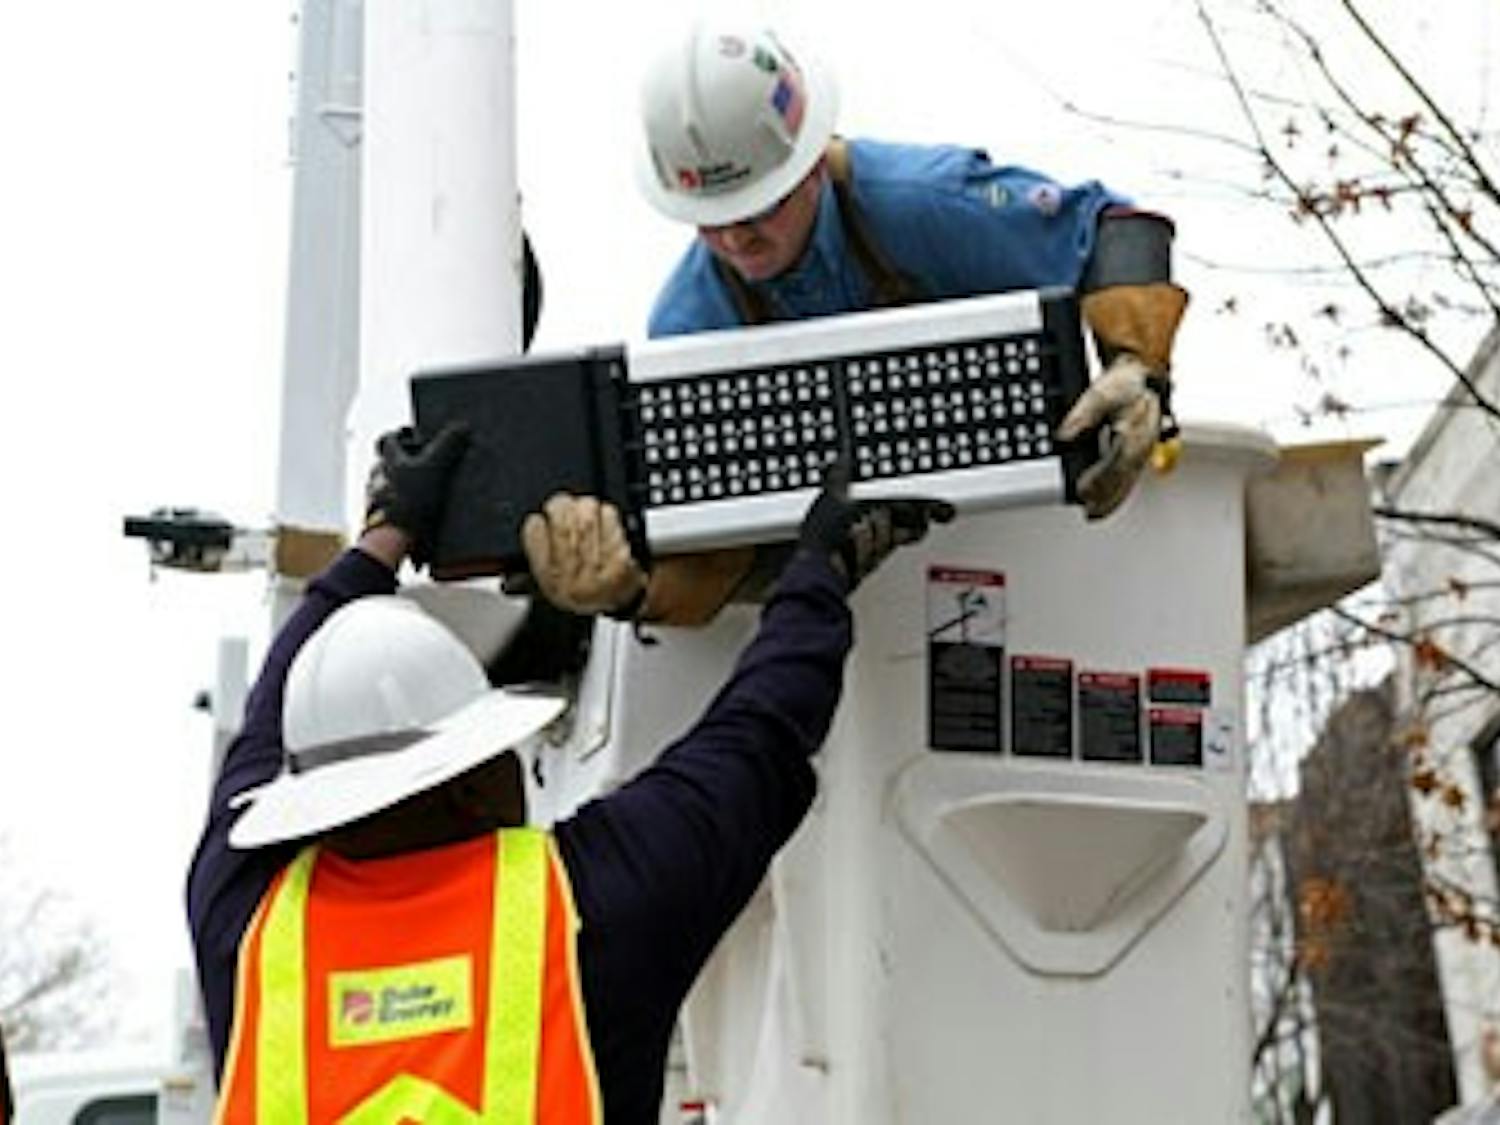 Duke Energy workers install one of 10 LED streetlights on Franklin Street in 2012 as part of a 12-month pilot program to evaluate the effectiveness of the LED lamps in increasing safety at night. The lamps are also expected to last longer and lower carbon emissions.